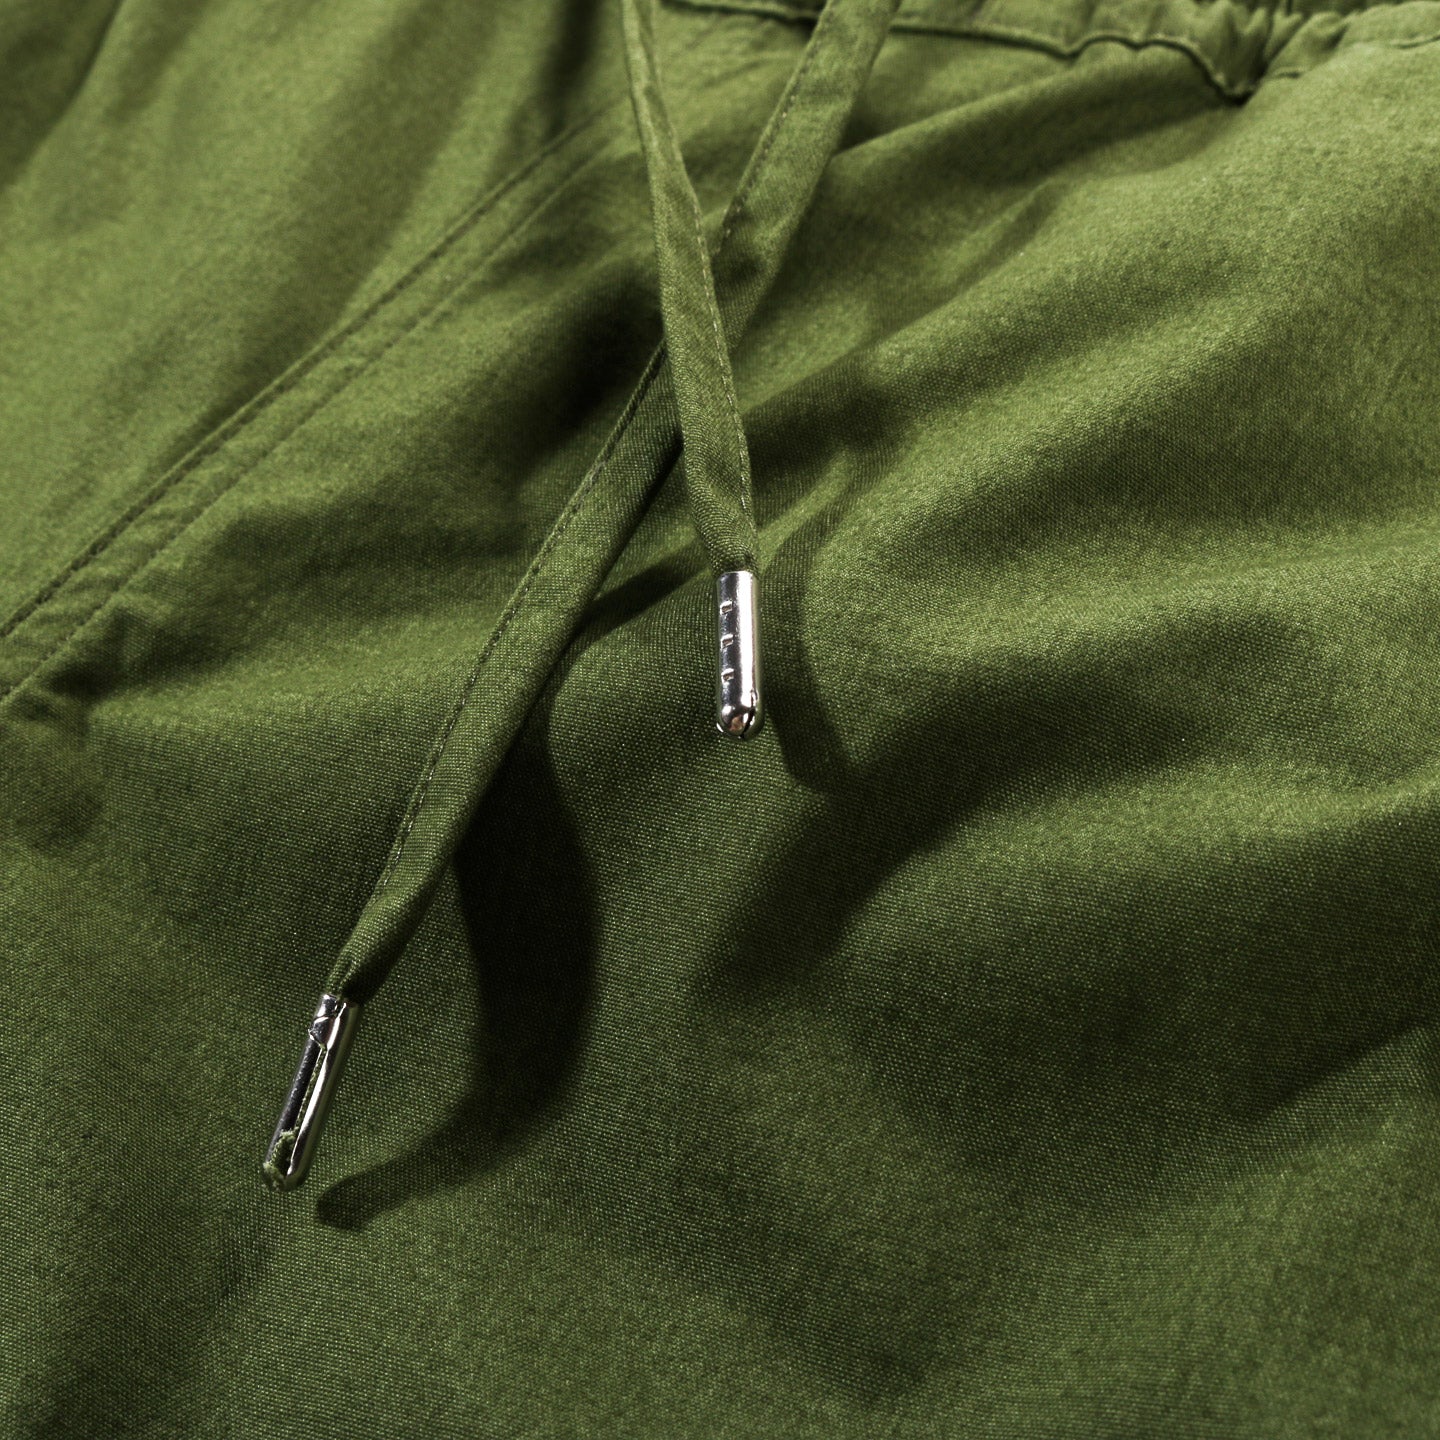 A KIND OF GUISE VOLTA SHORTS PICKLED GREEN